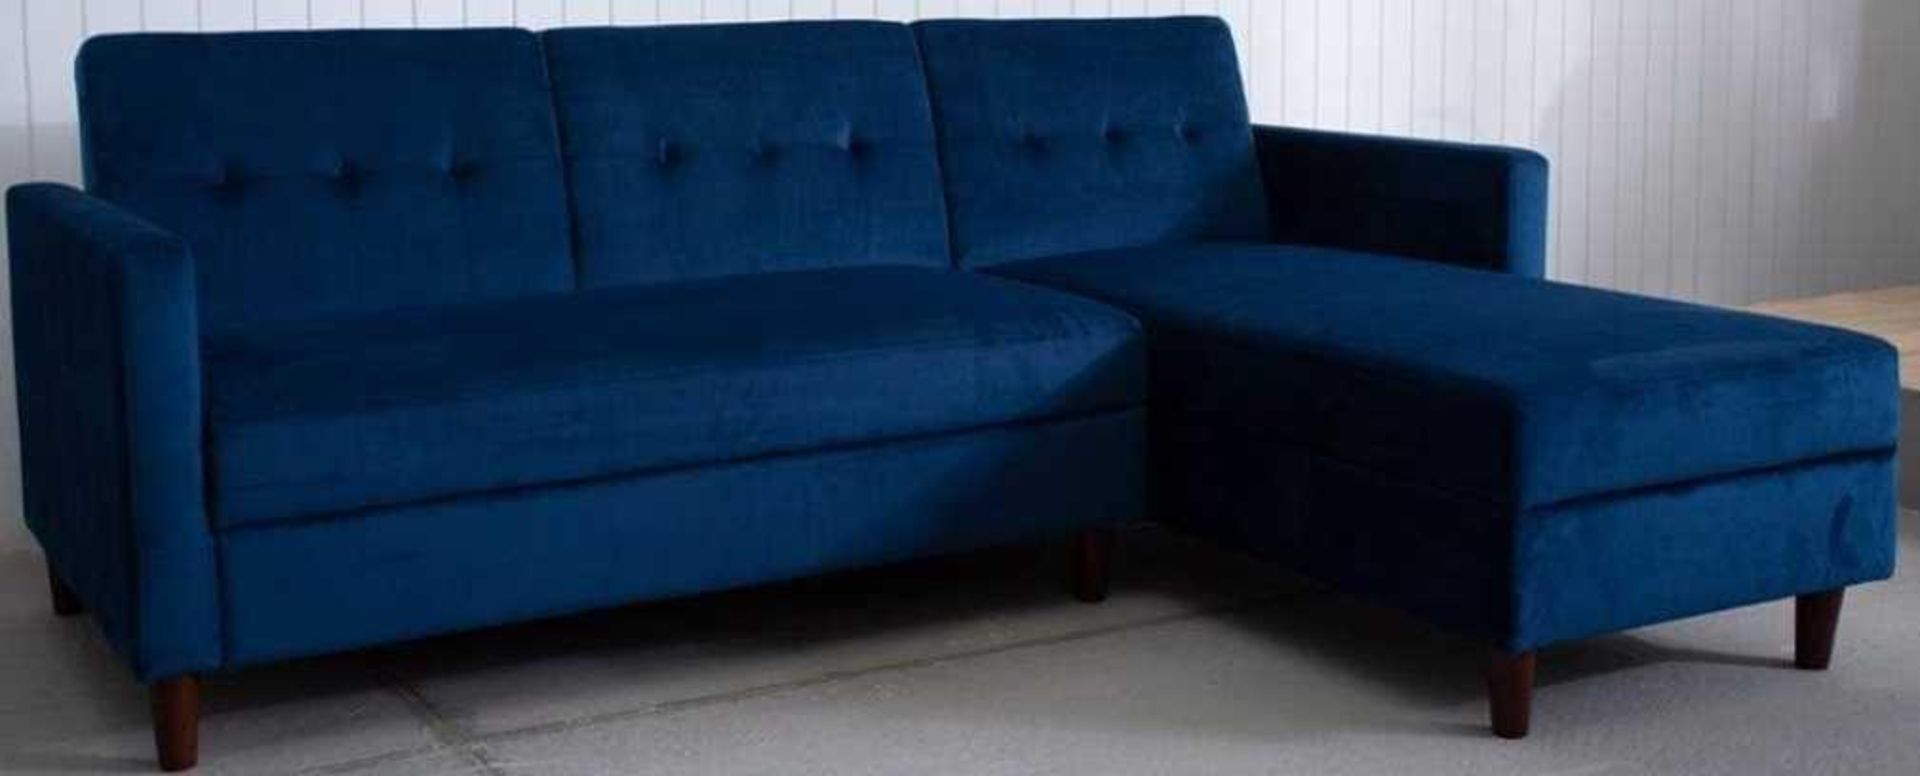 RRP £1300 L SHAPED 3 PIECE VELVET BLUE SOFA AND BED